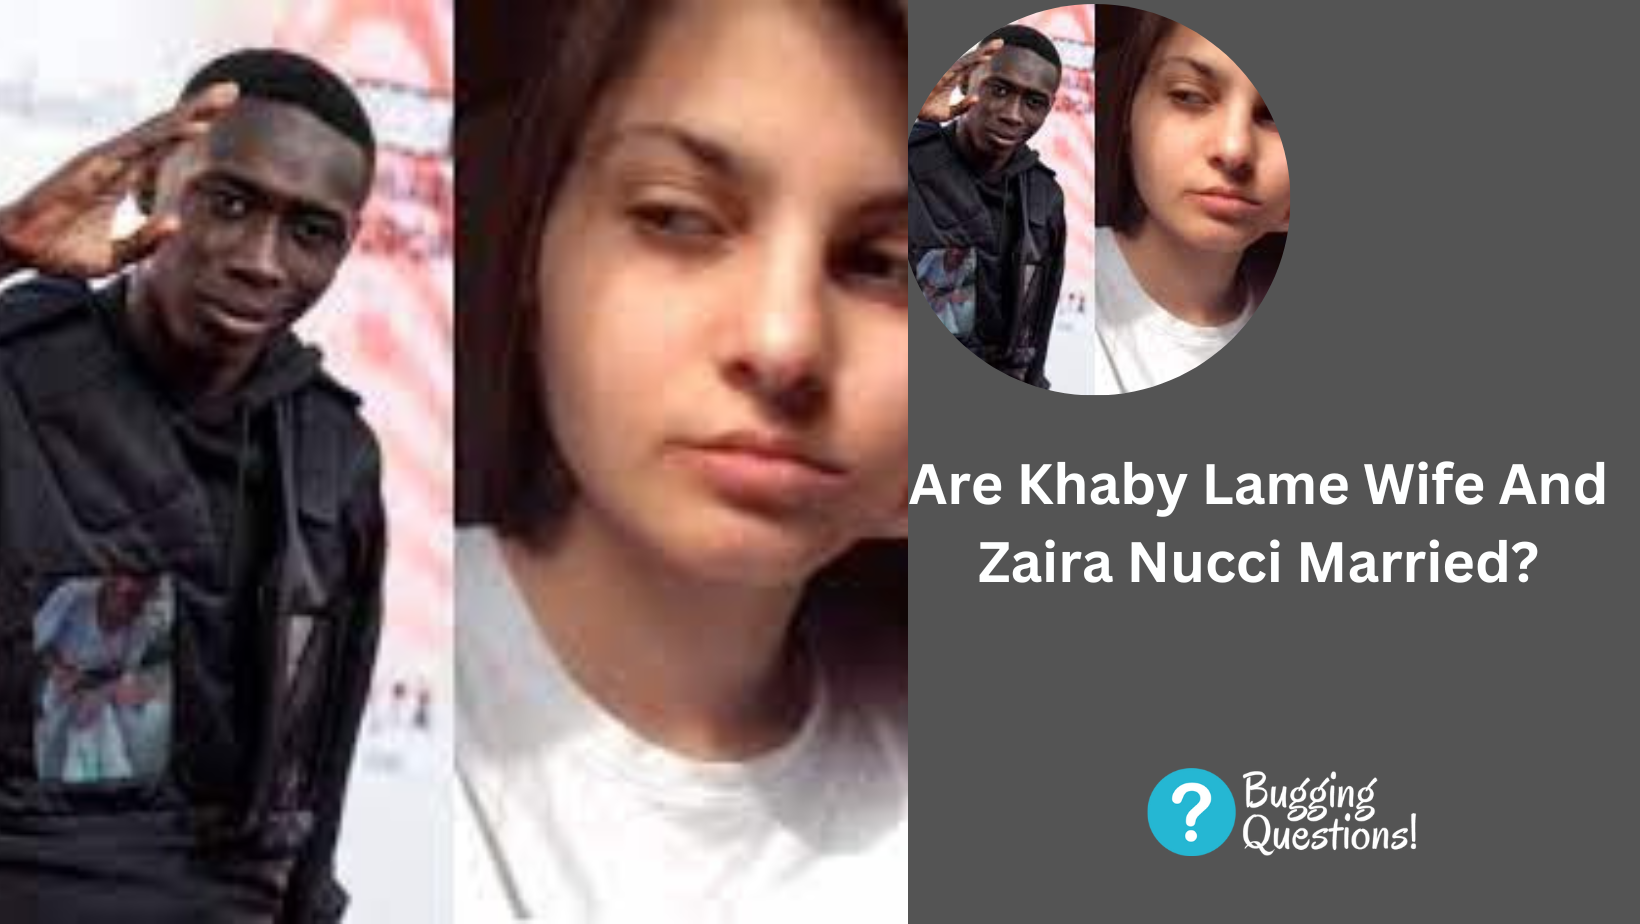 Are Khaby Lame Wife And Zaira Nucci Married?